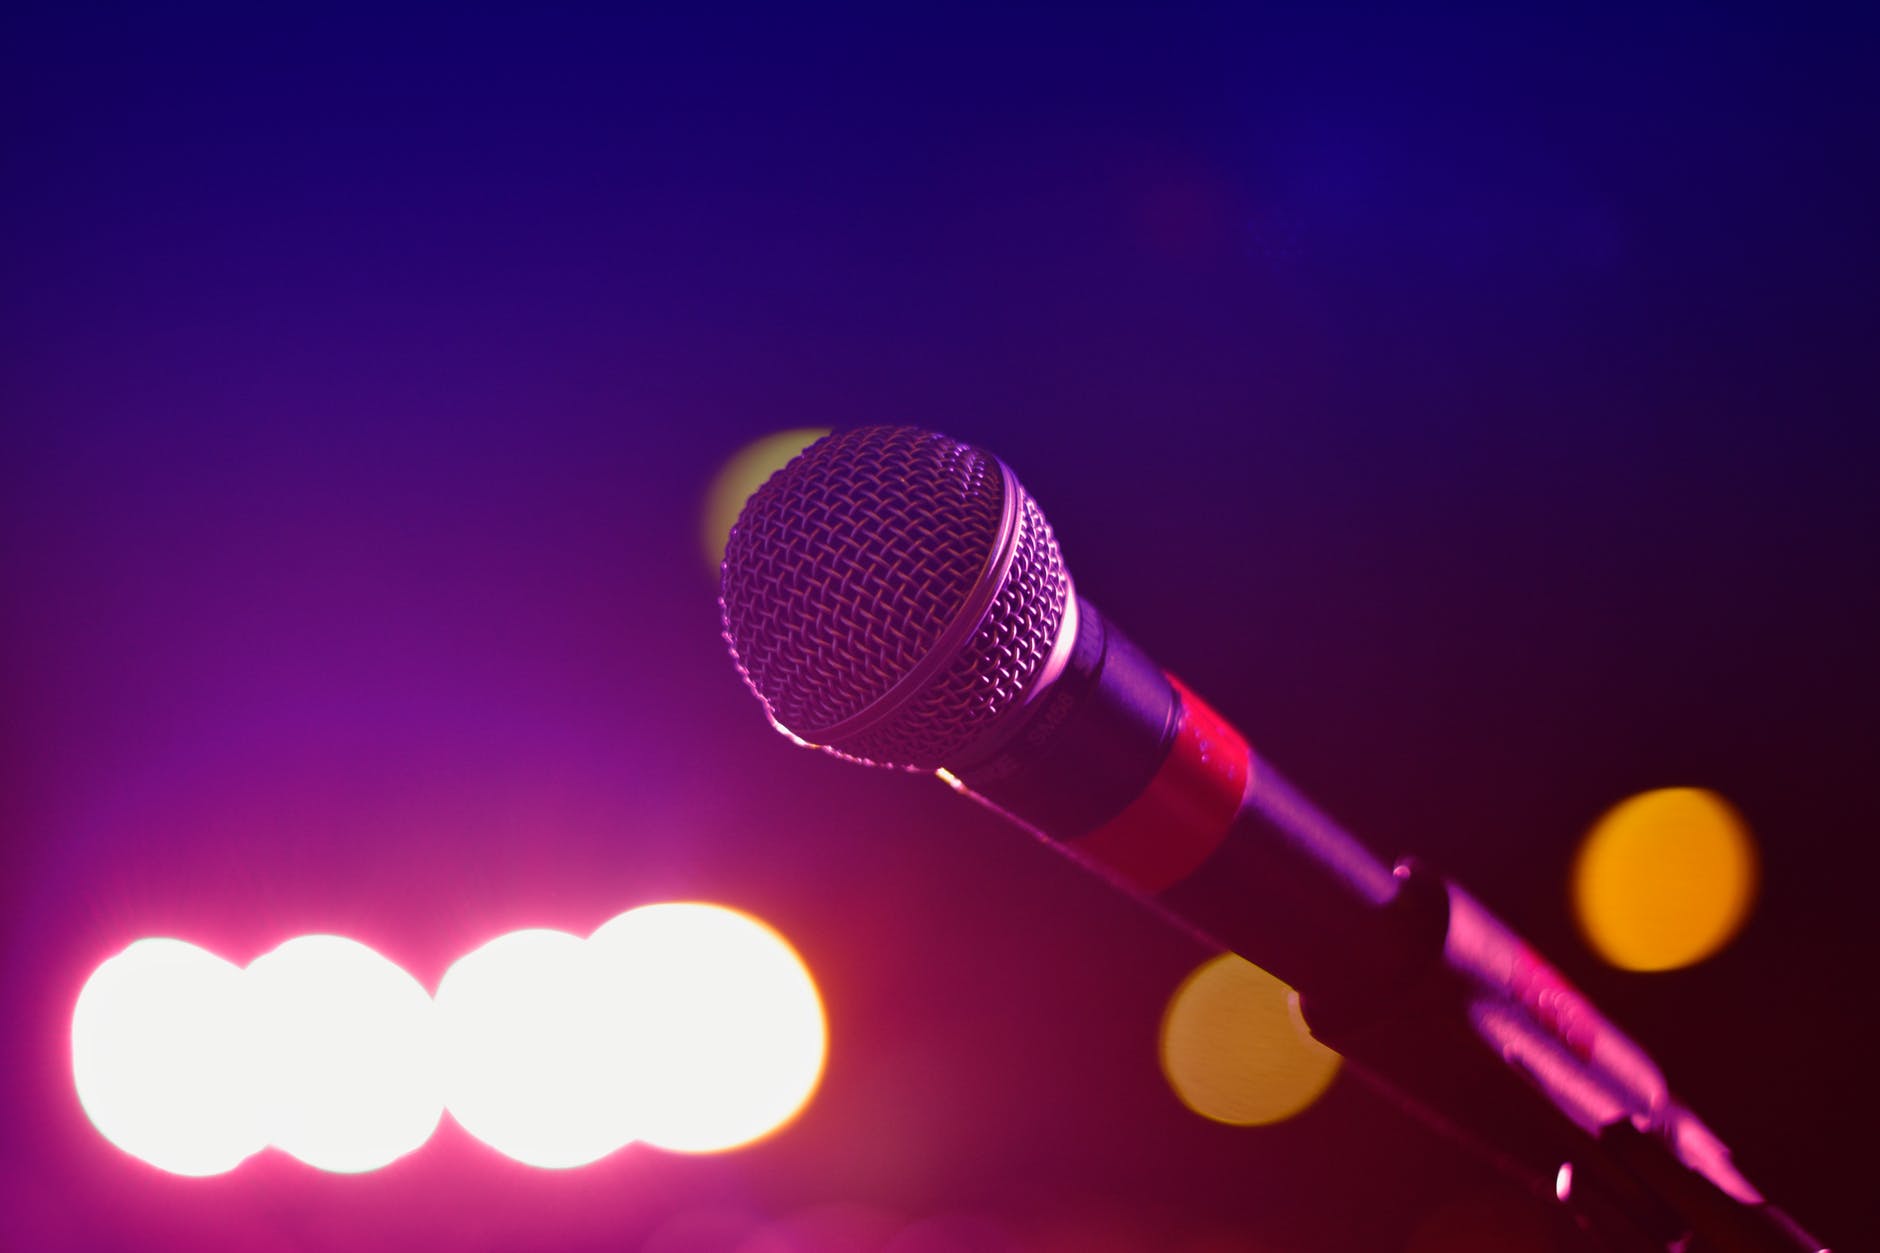 How-to guide: Your first open mic